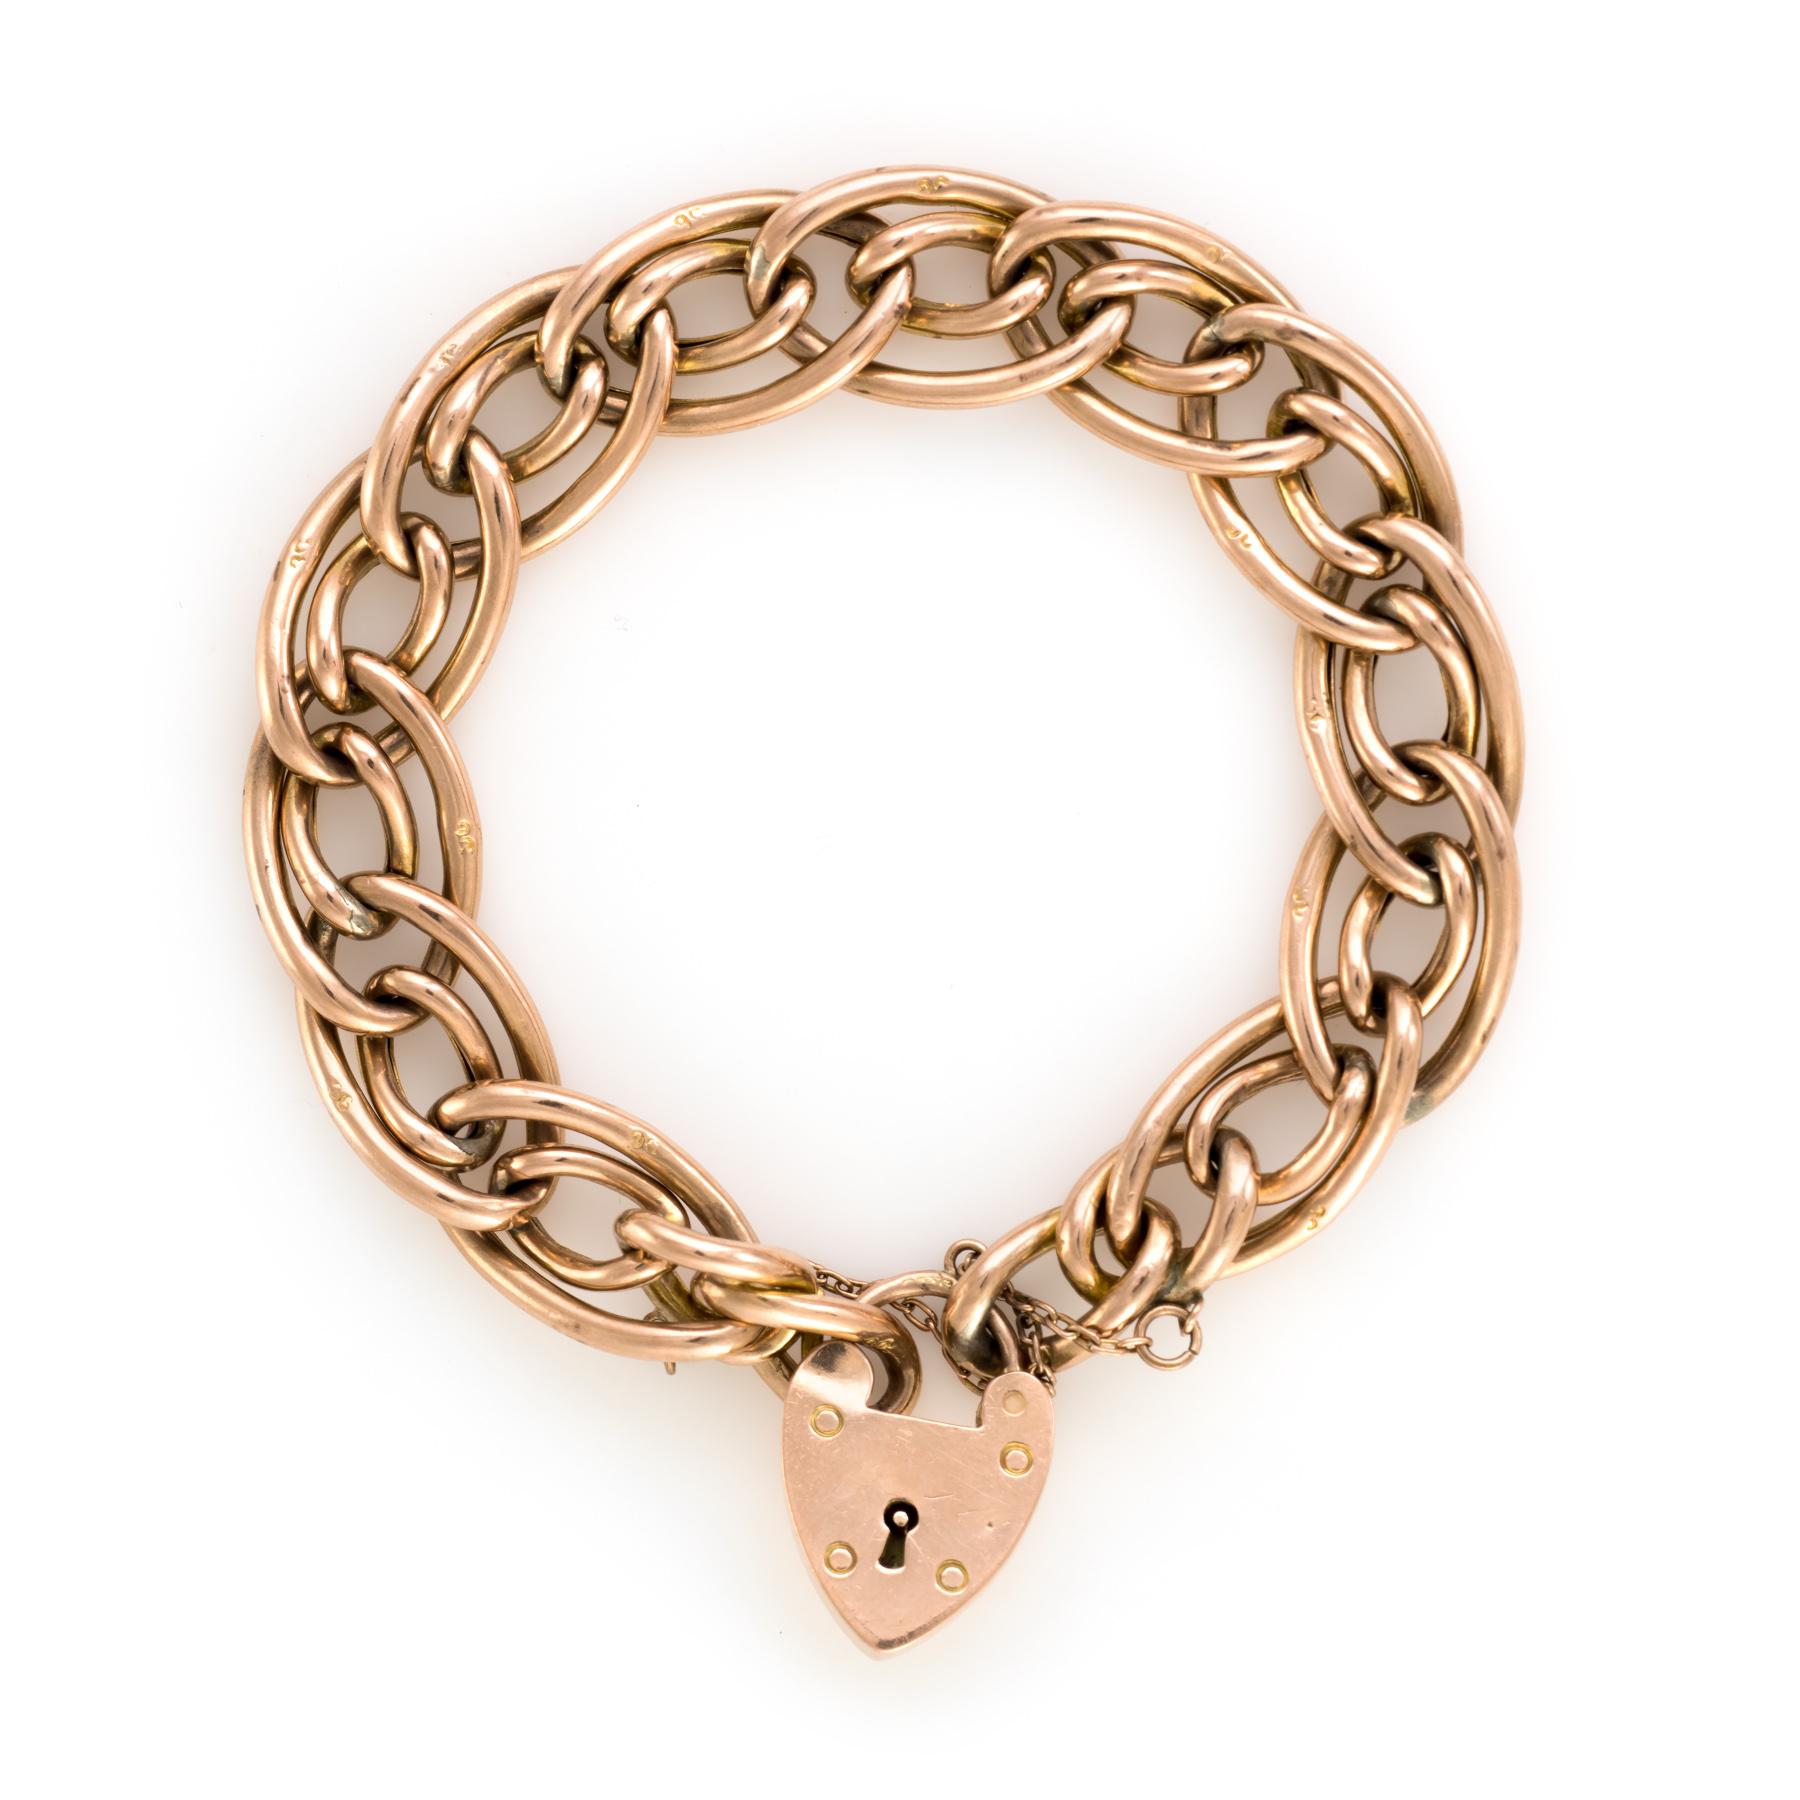 Finely detailed antique Edwardian oval link bracelet (circa 1908), crafted in 9 karat rose gold.  

This antique Edwardian bracelet was made in Birmingham, England in 1908. The 'day & night' style is represented with the larger oval links in a